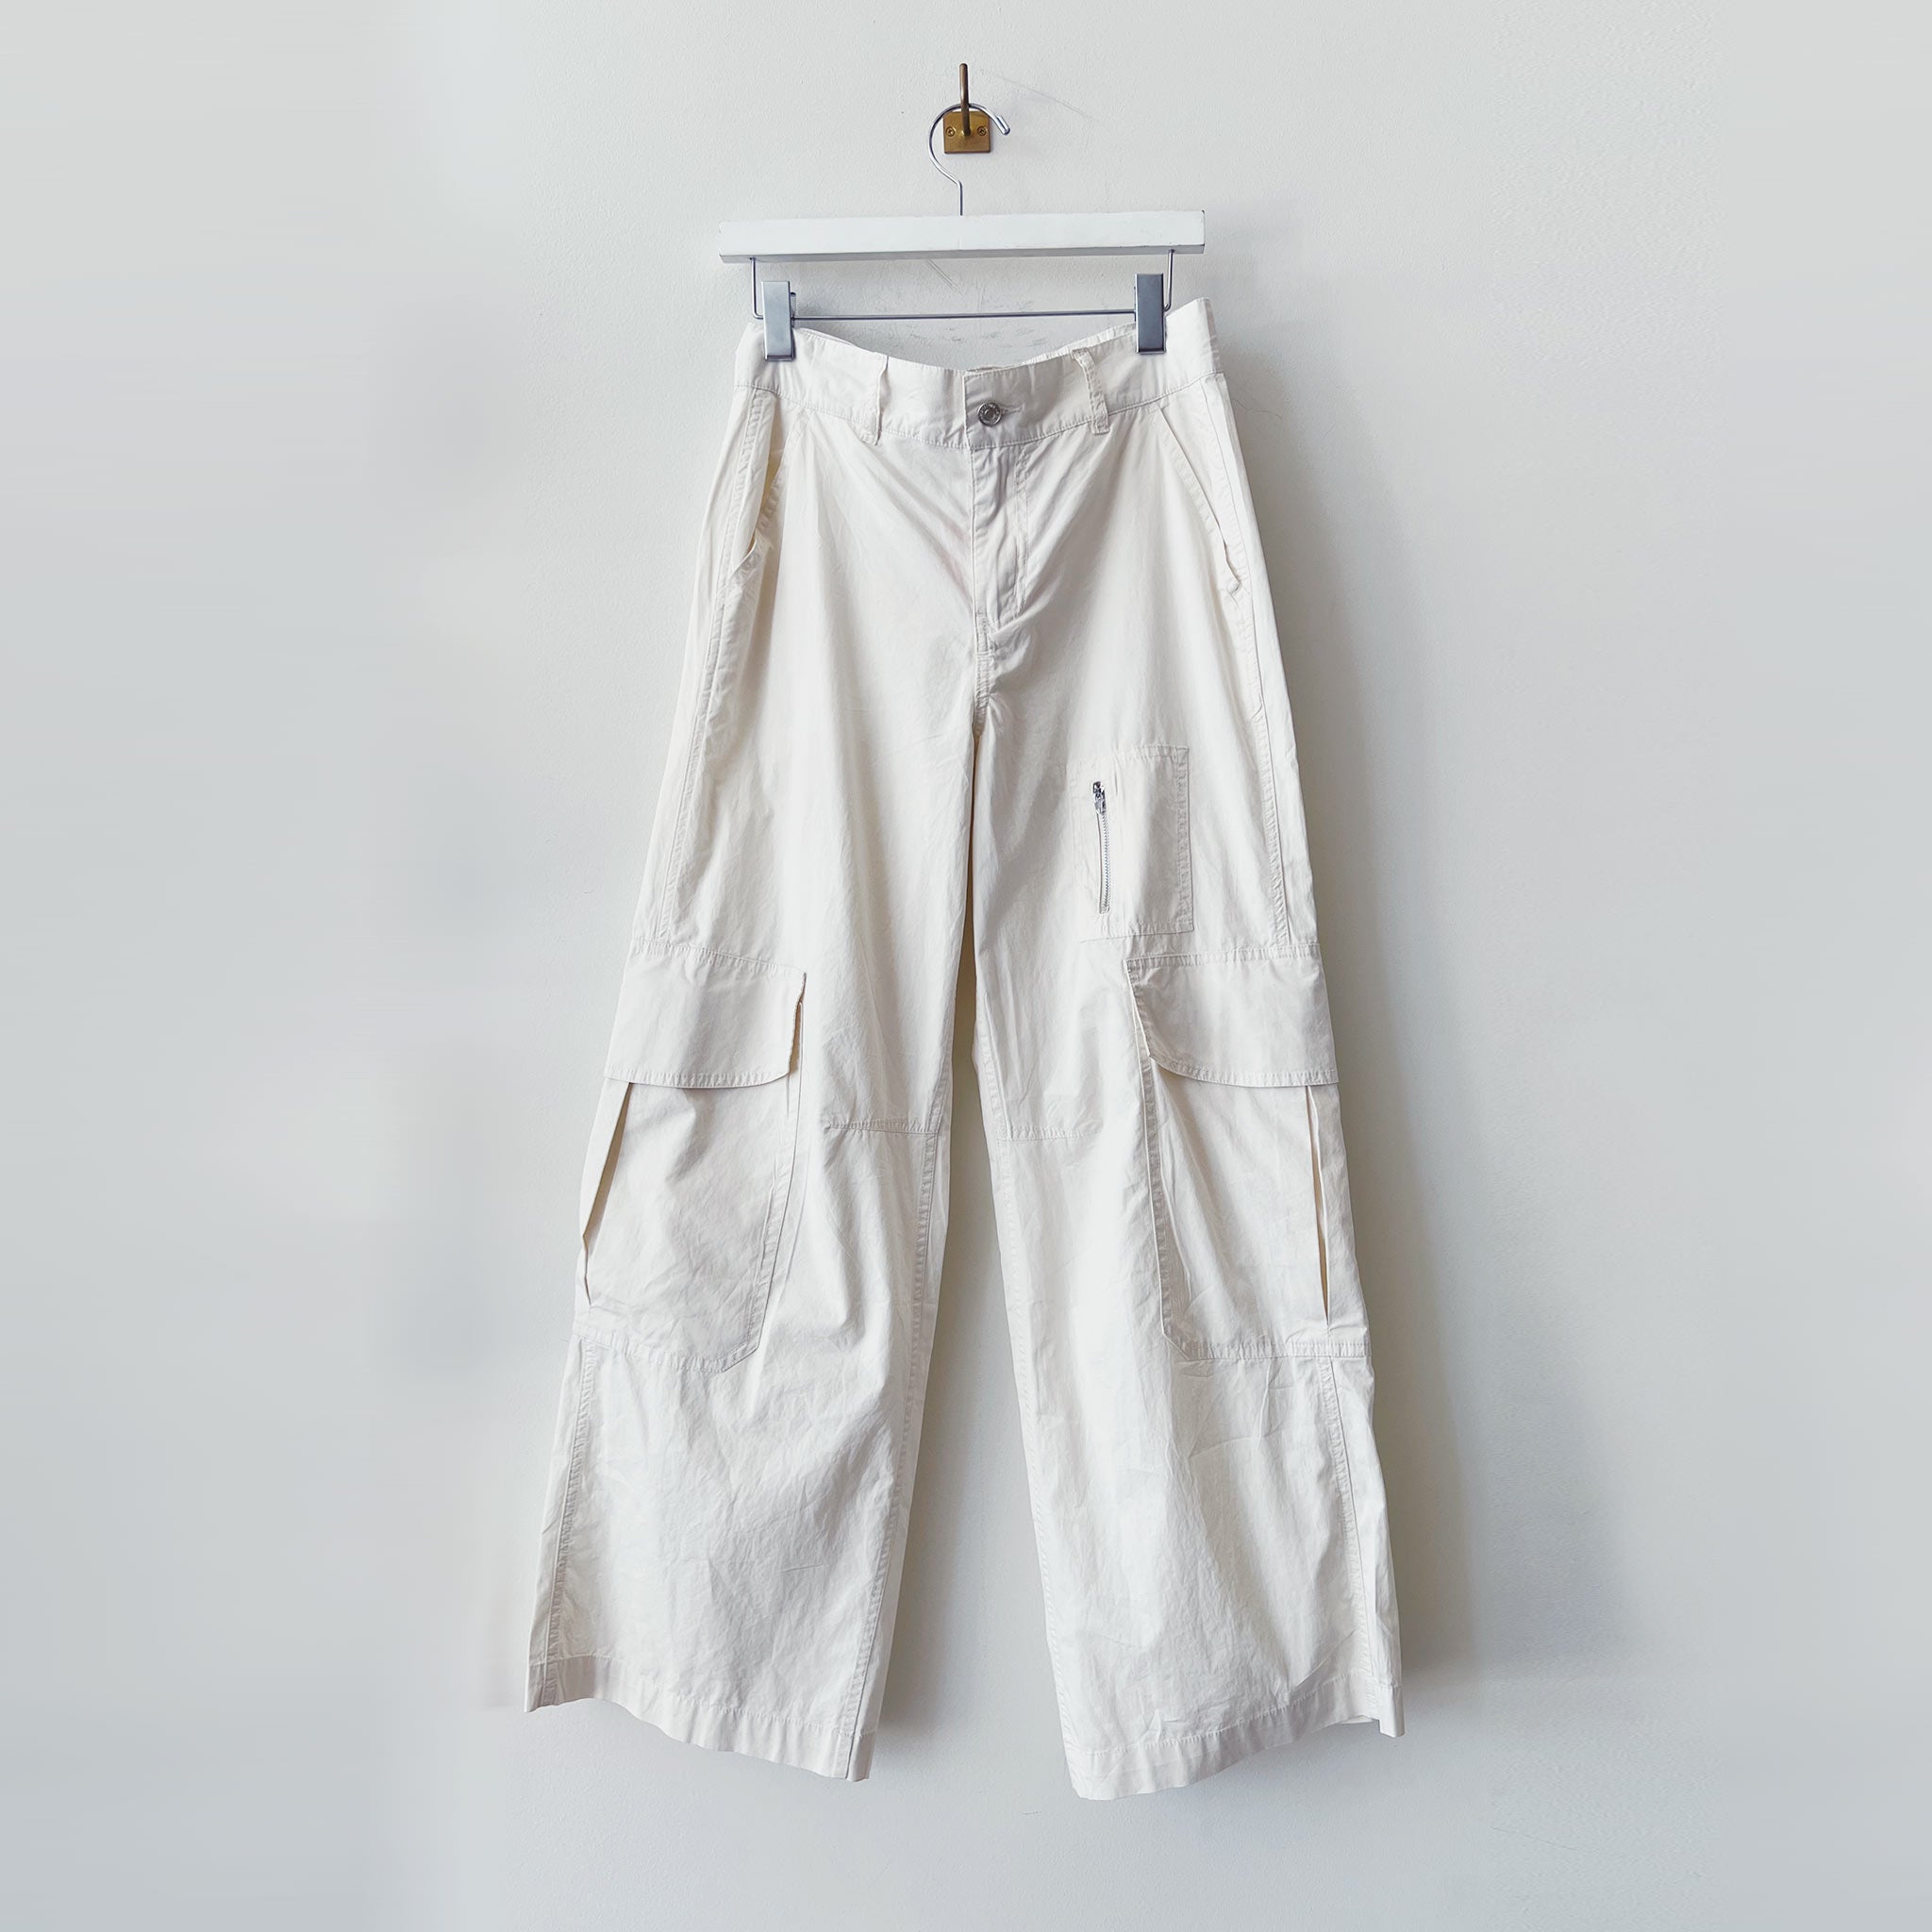 Close detail photo of the Wide Leg Cargo Pant - Cream.